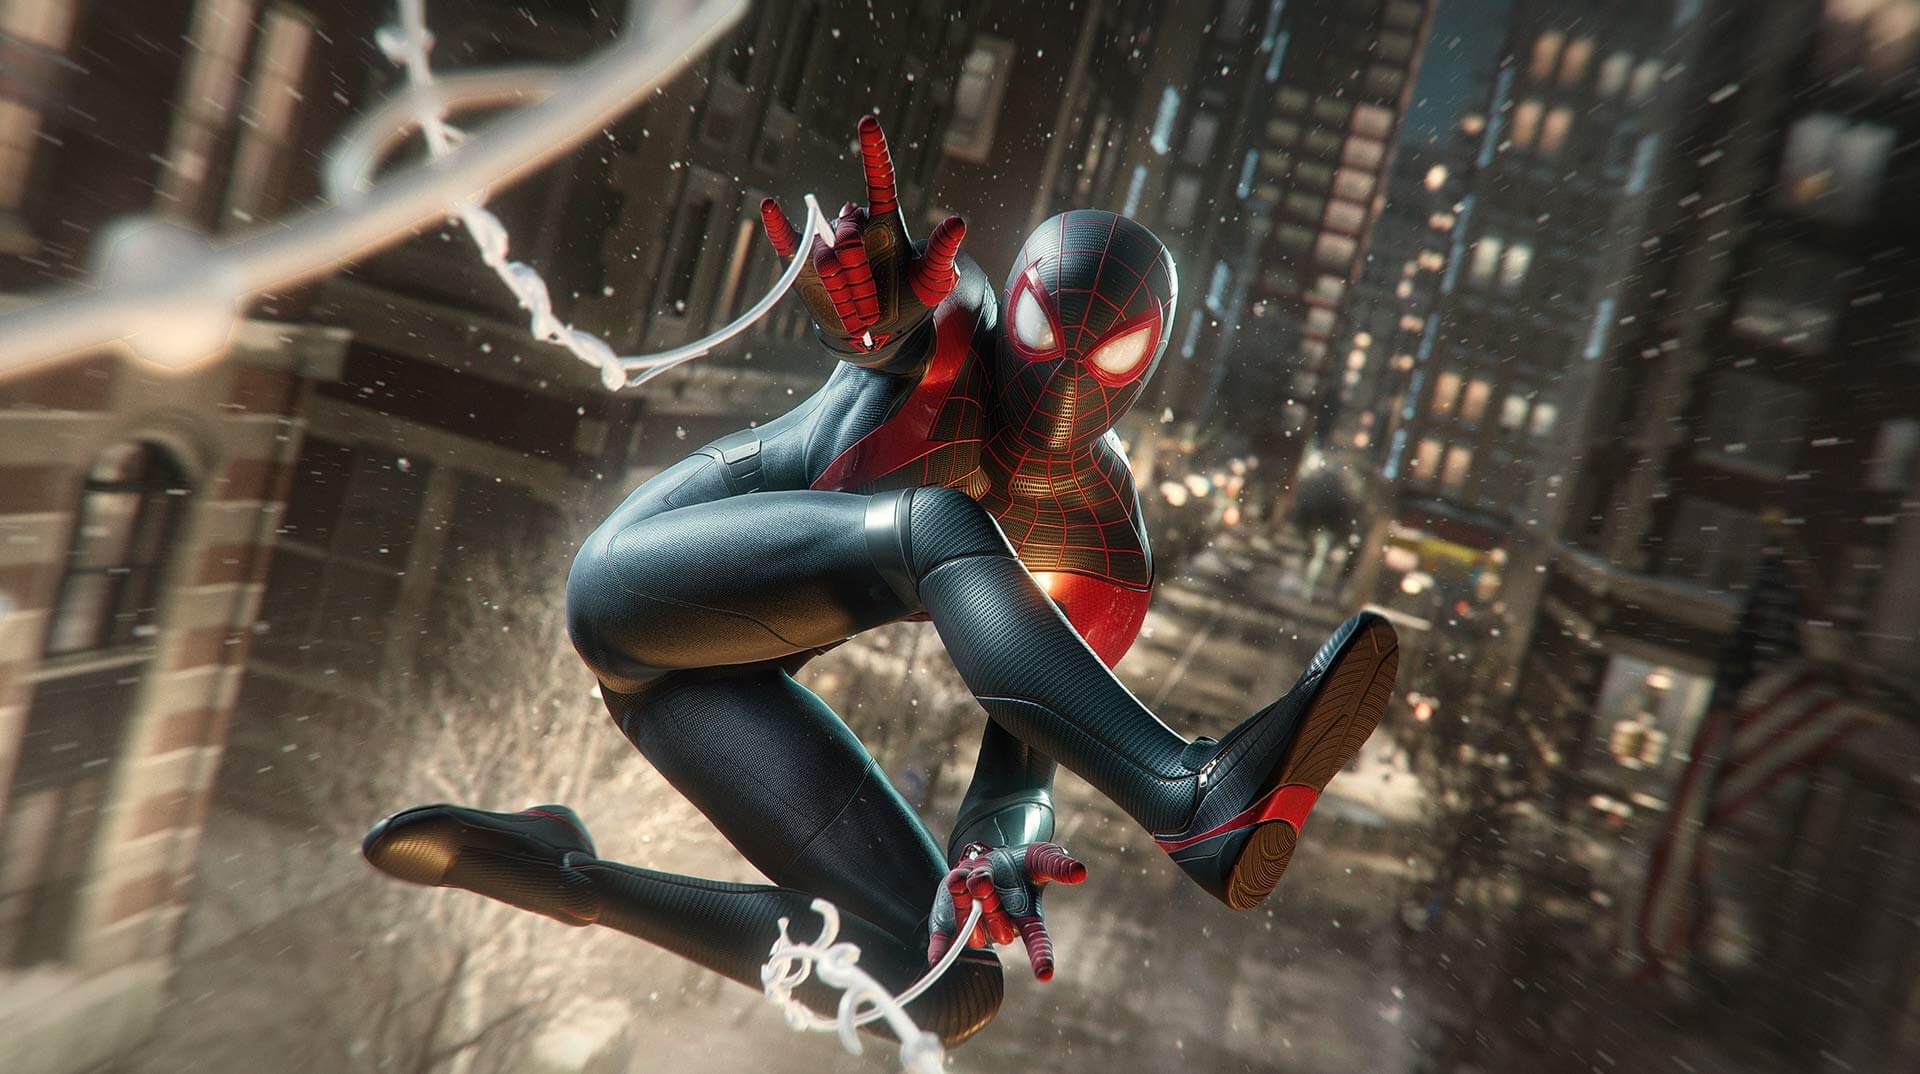 Spider-Man PC's first patch fixes ray-tracing crashes and stability issues